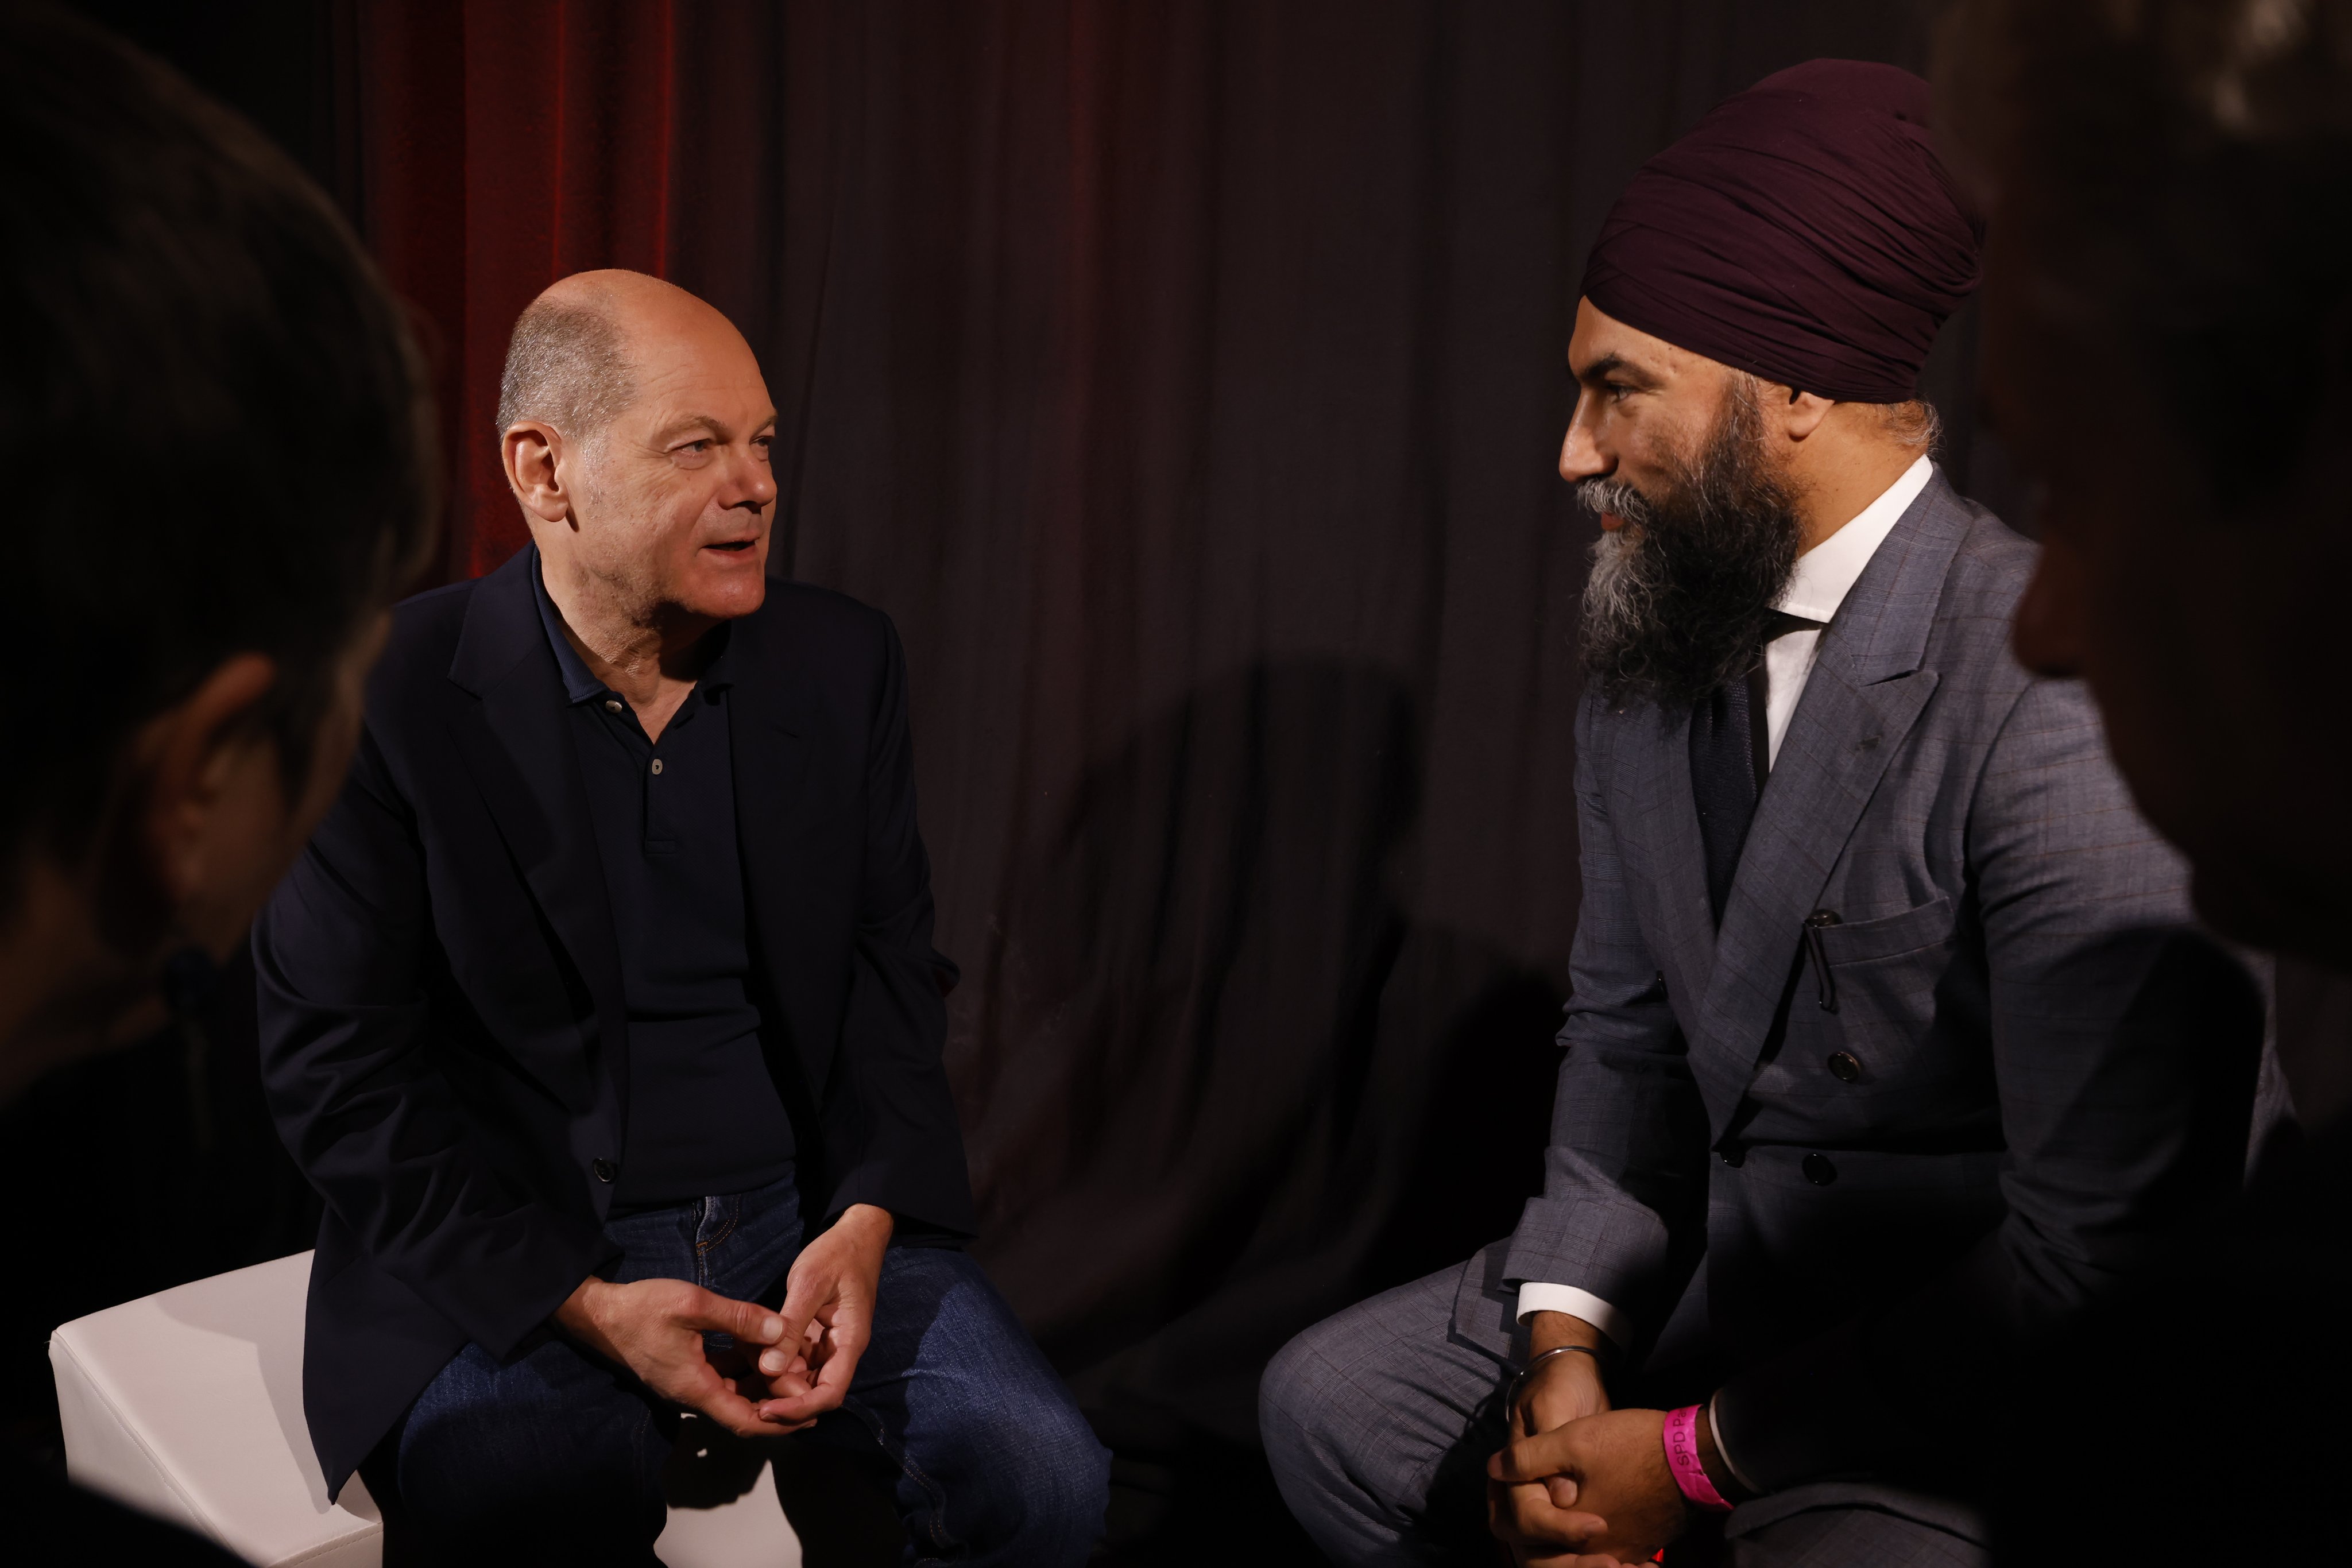 Jagmeet Singh on Twitter: "I was honoured to speak with Chancellor @OlafScholz. His campaign about respect for working people in Germany was inspiring. As is the work his party and his government